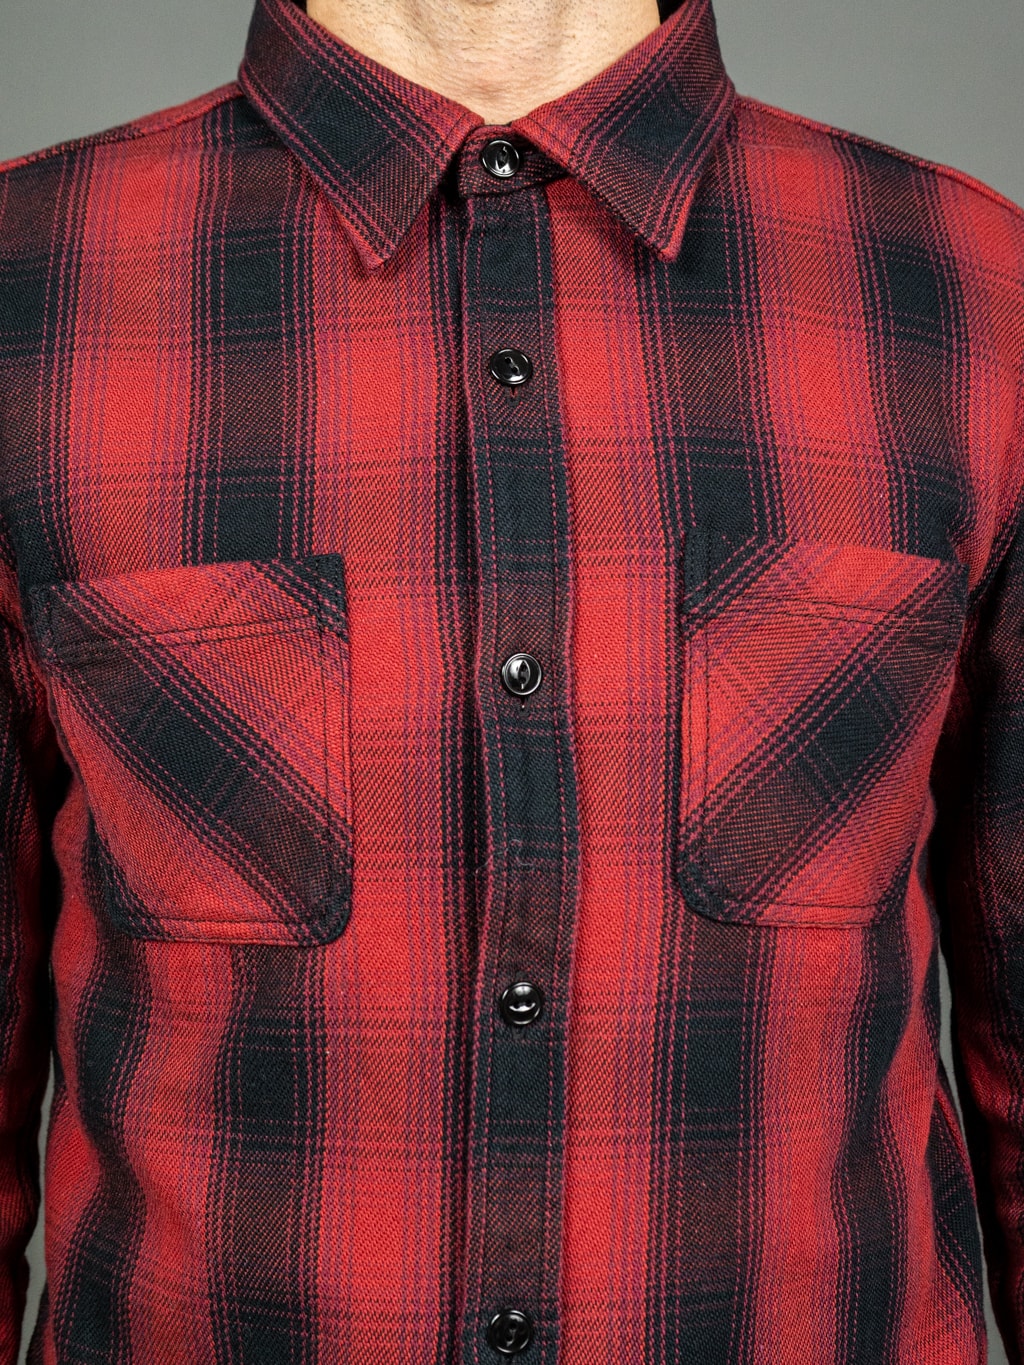 The flat head flannel shirt red work chest pockets